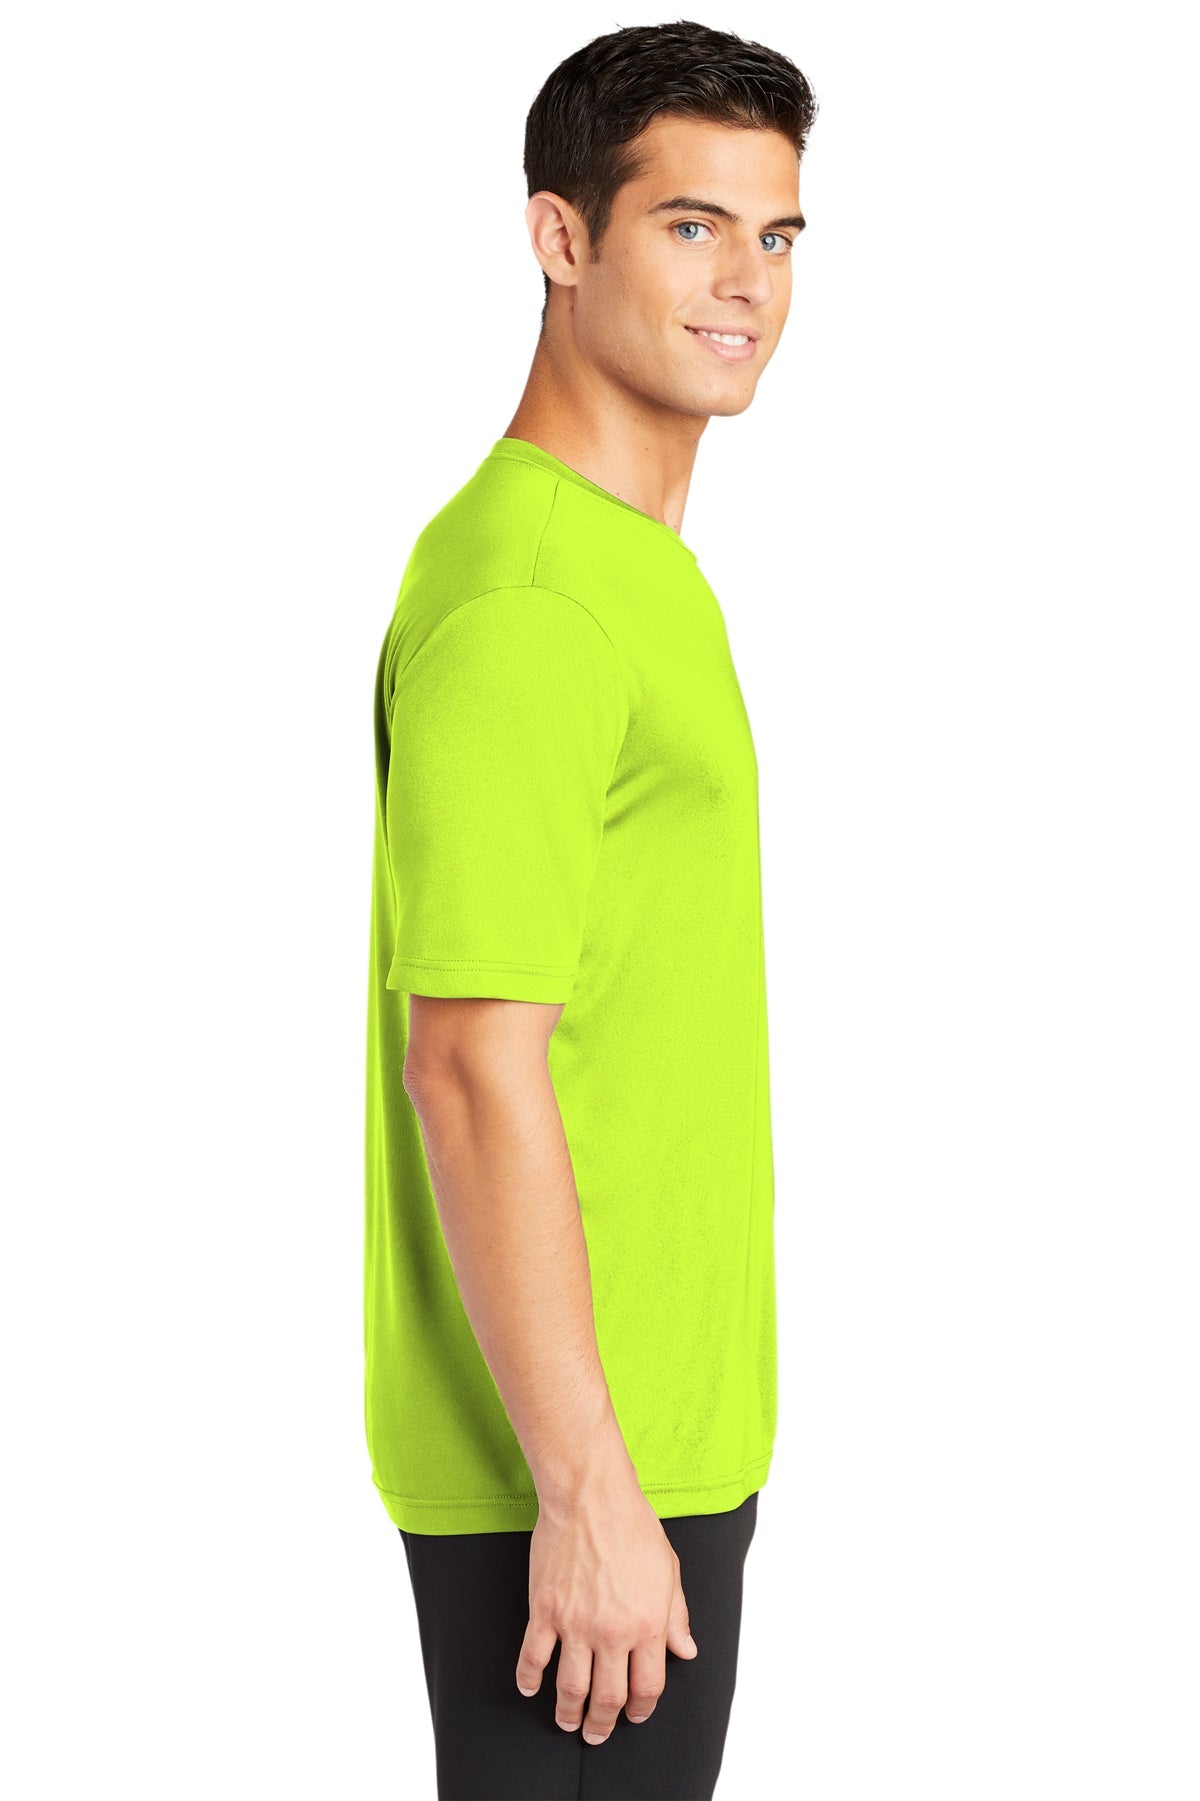 Sport-Tek Tall PosiCharge Customized Competitor Tee's, Neon Yellow